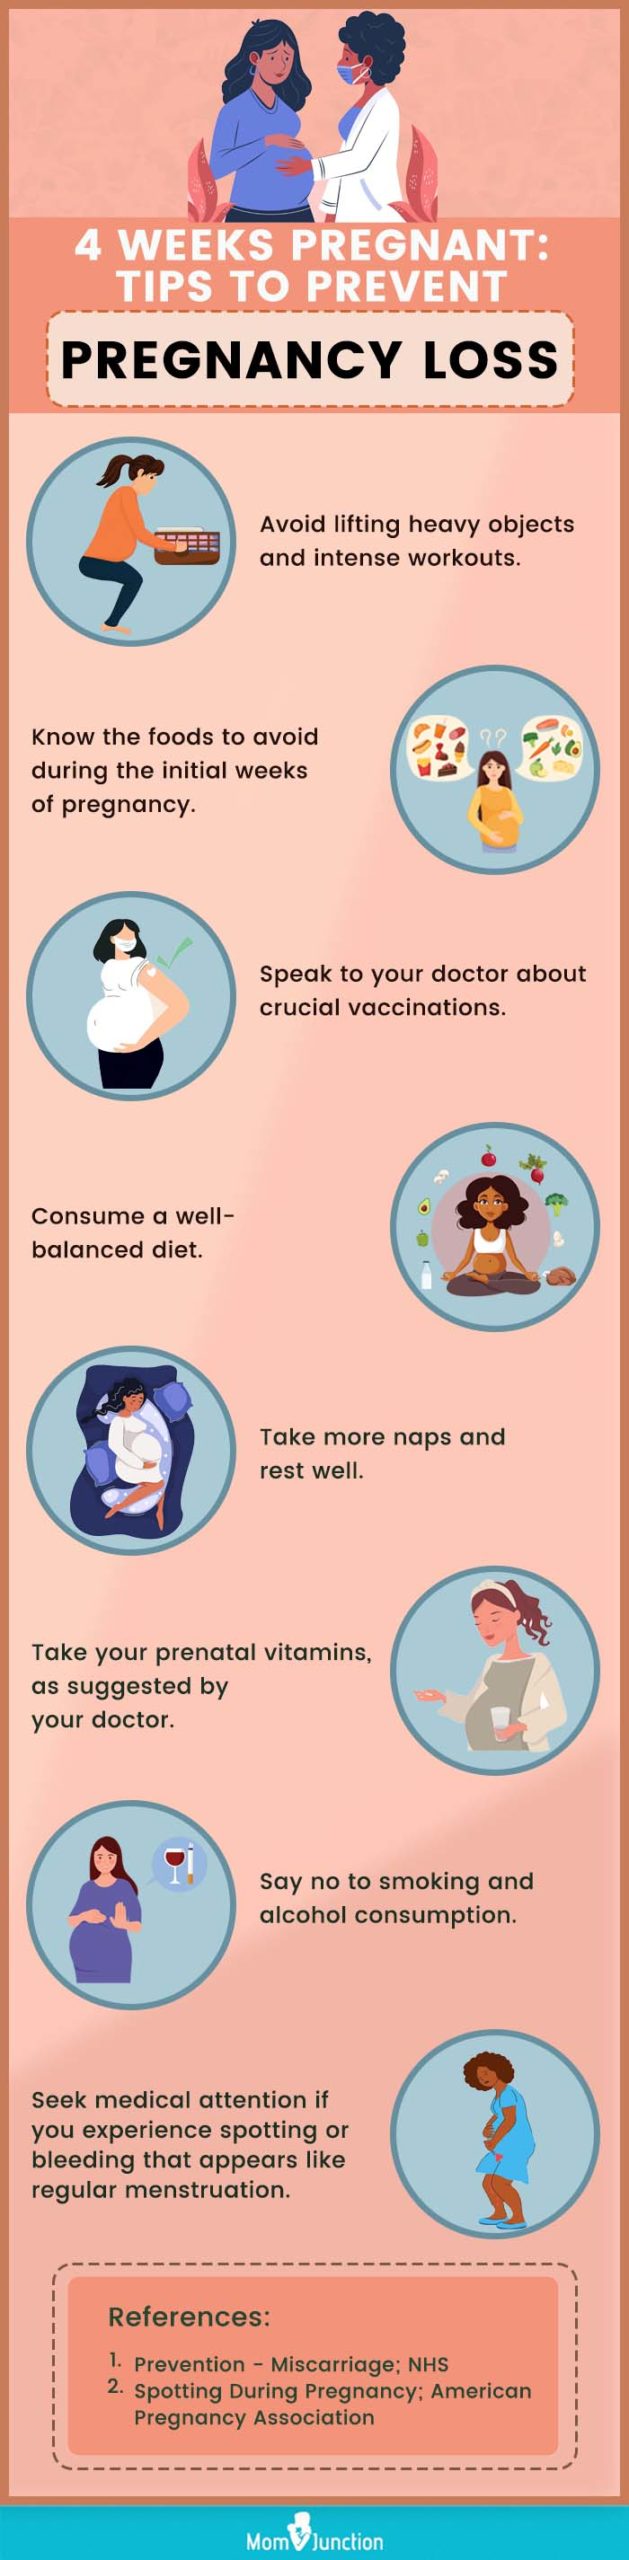 tips to reduce miscarriage risk at four weeks pregnant (infographic)